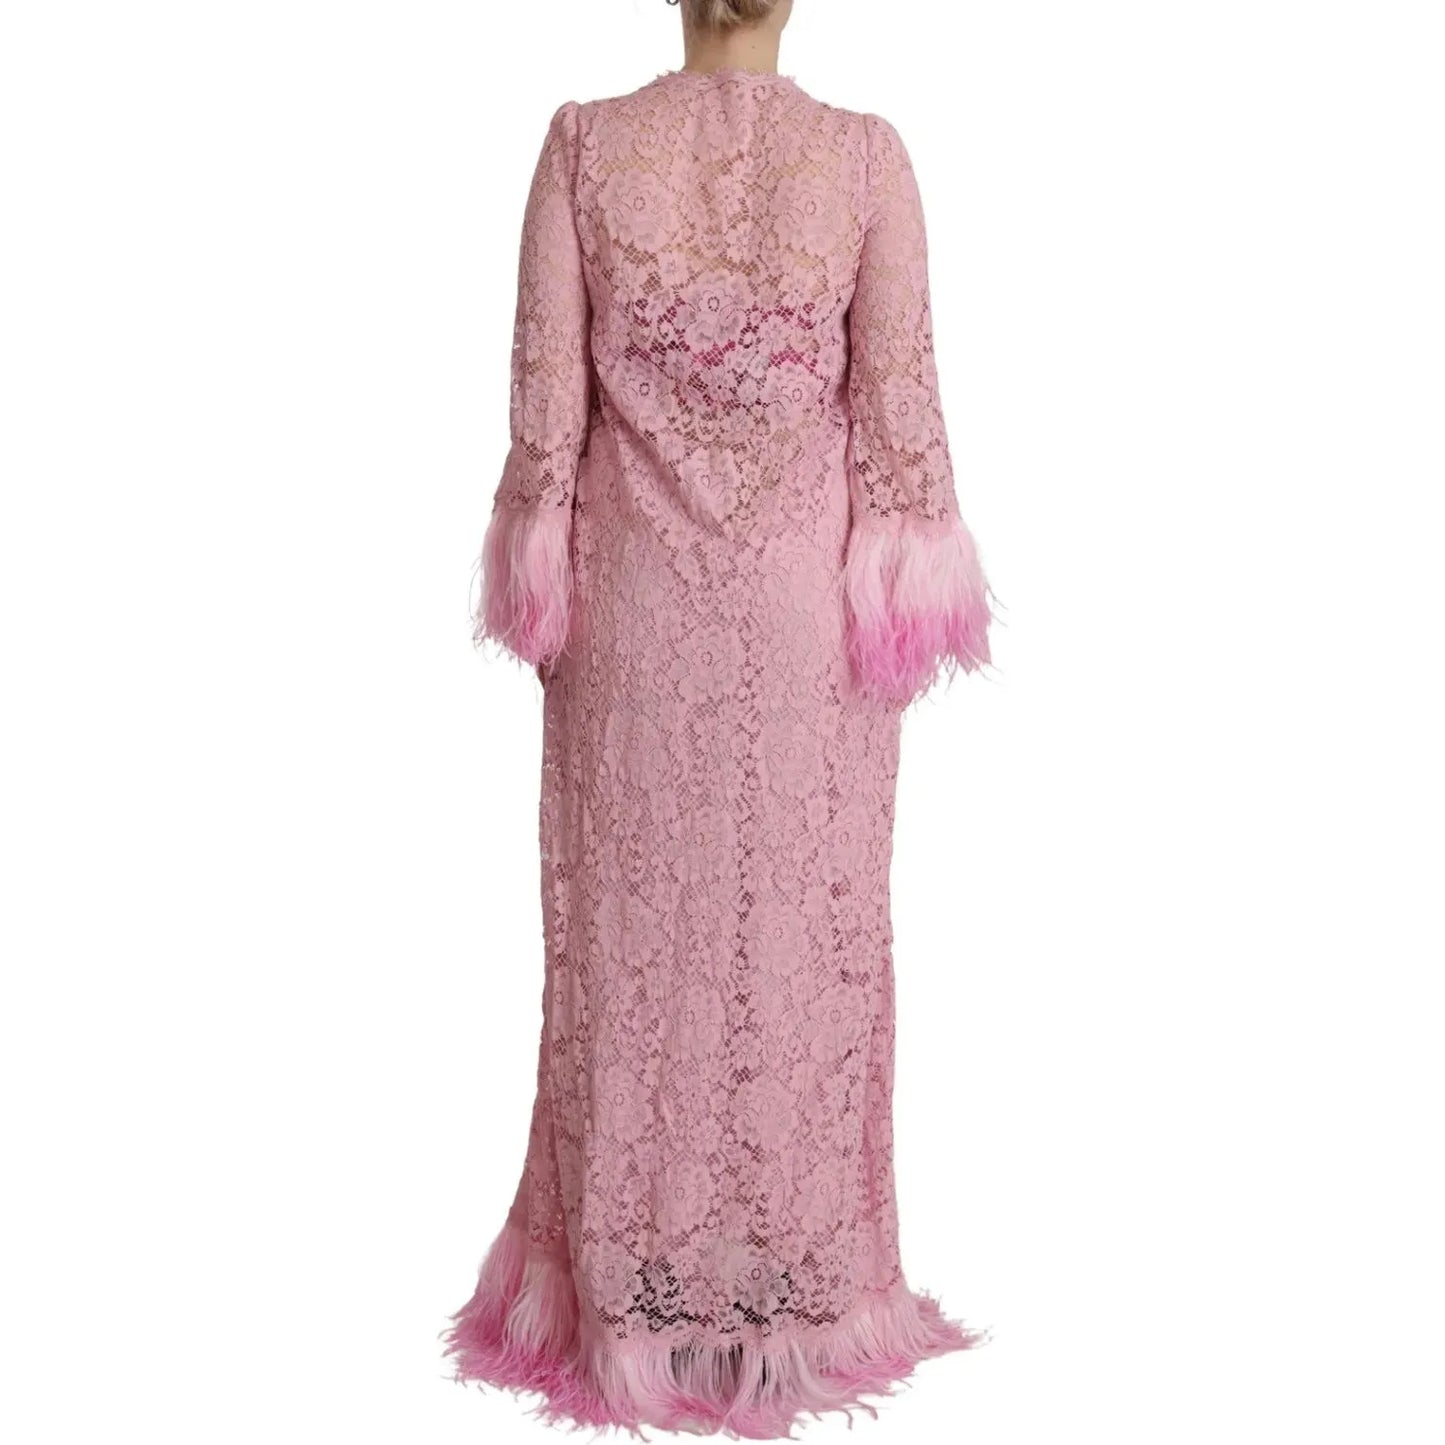 Shift Lilac Lace Feathers Long Sleeves Dress